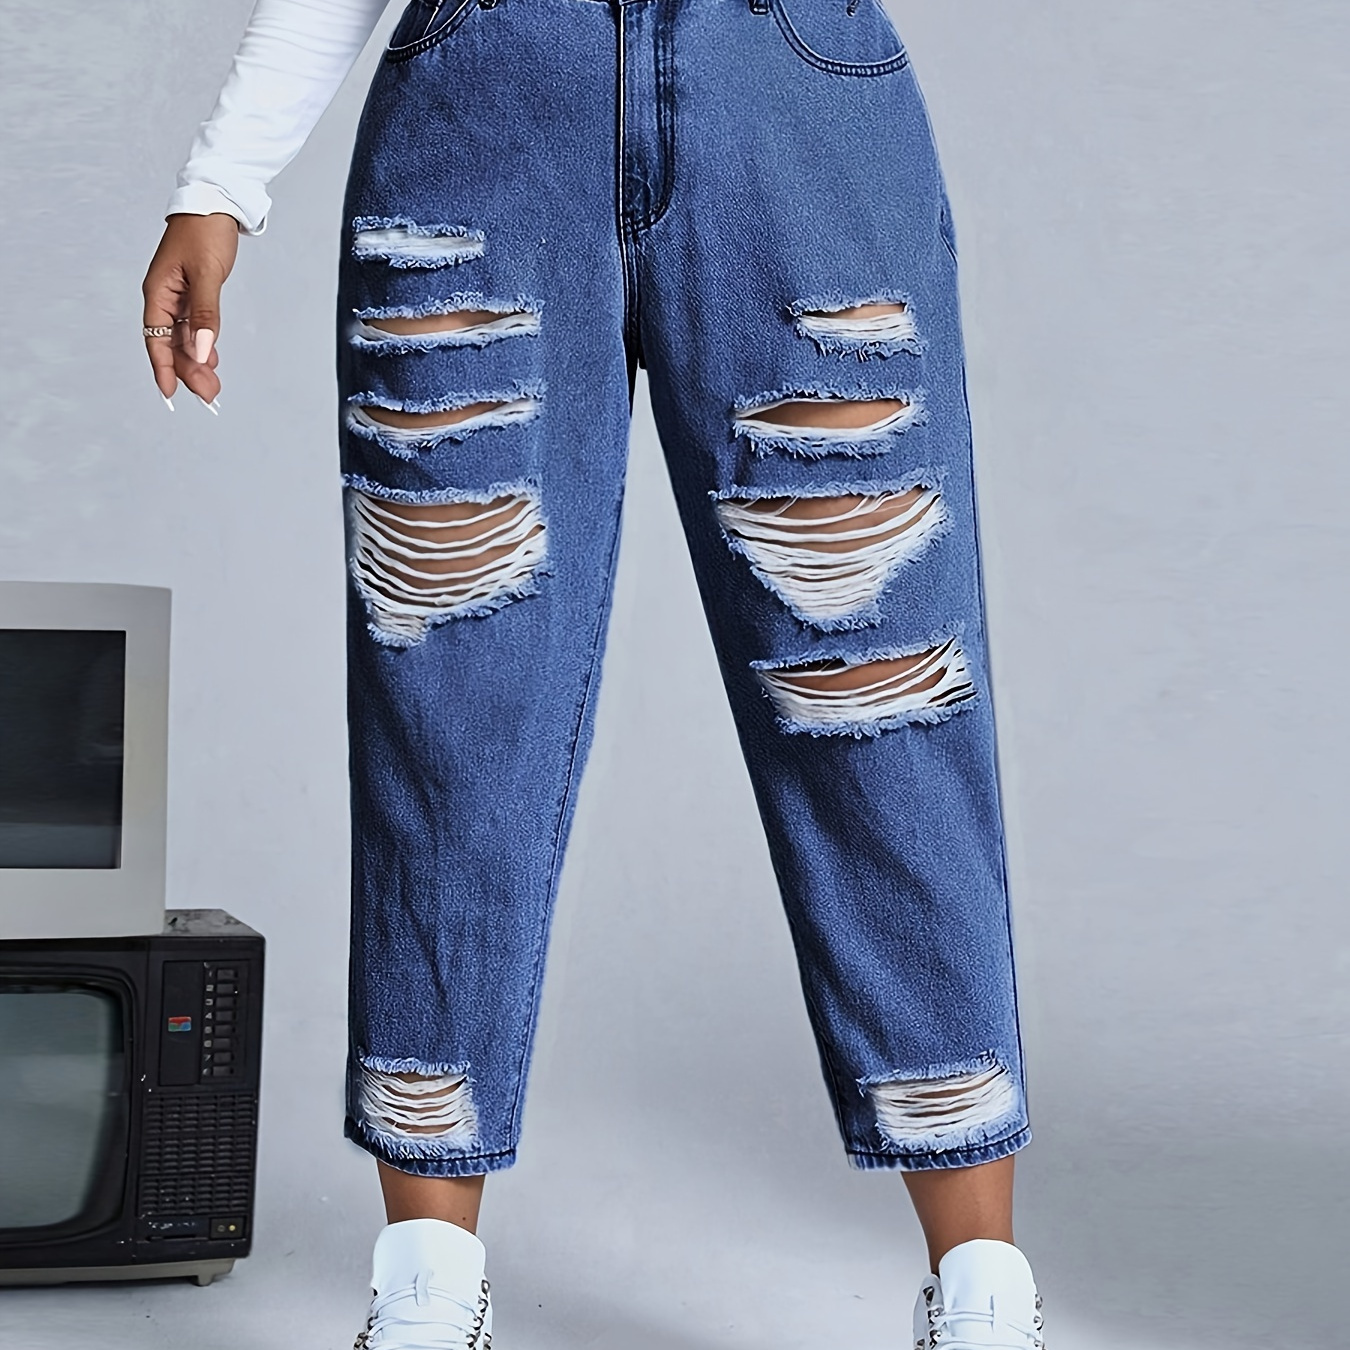 

Plus Size Elegant Ripped Slimming Denim Jeans, High-waisted Distressed Fashion Pants, Casual Streetwear, Women's Trendy Jean Trousers